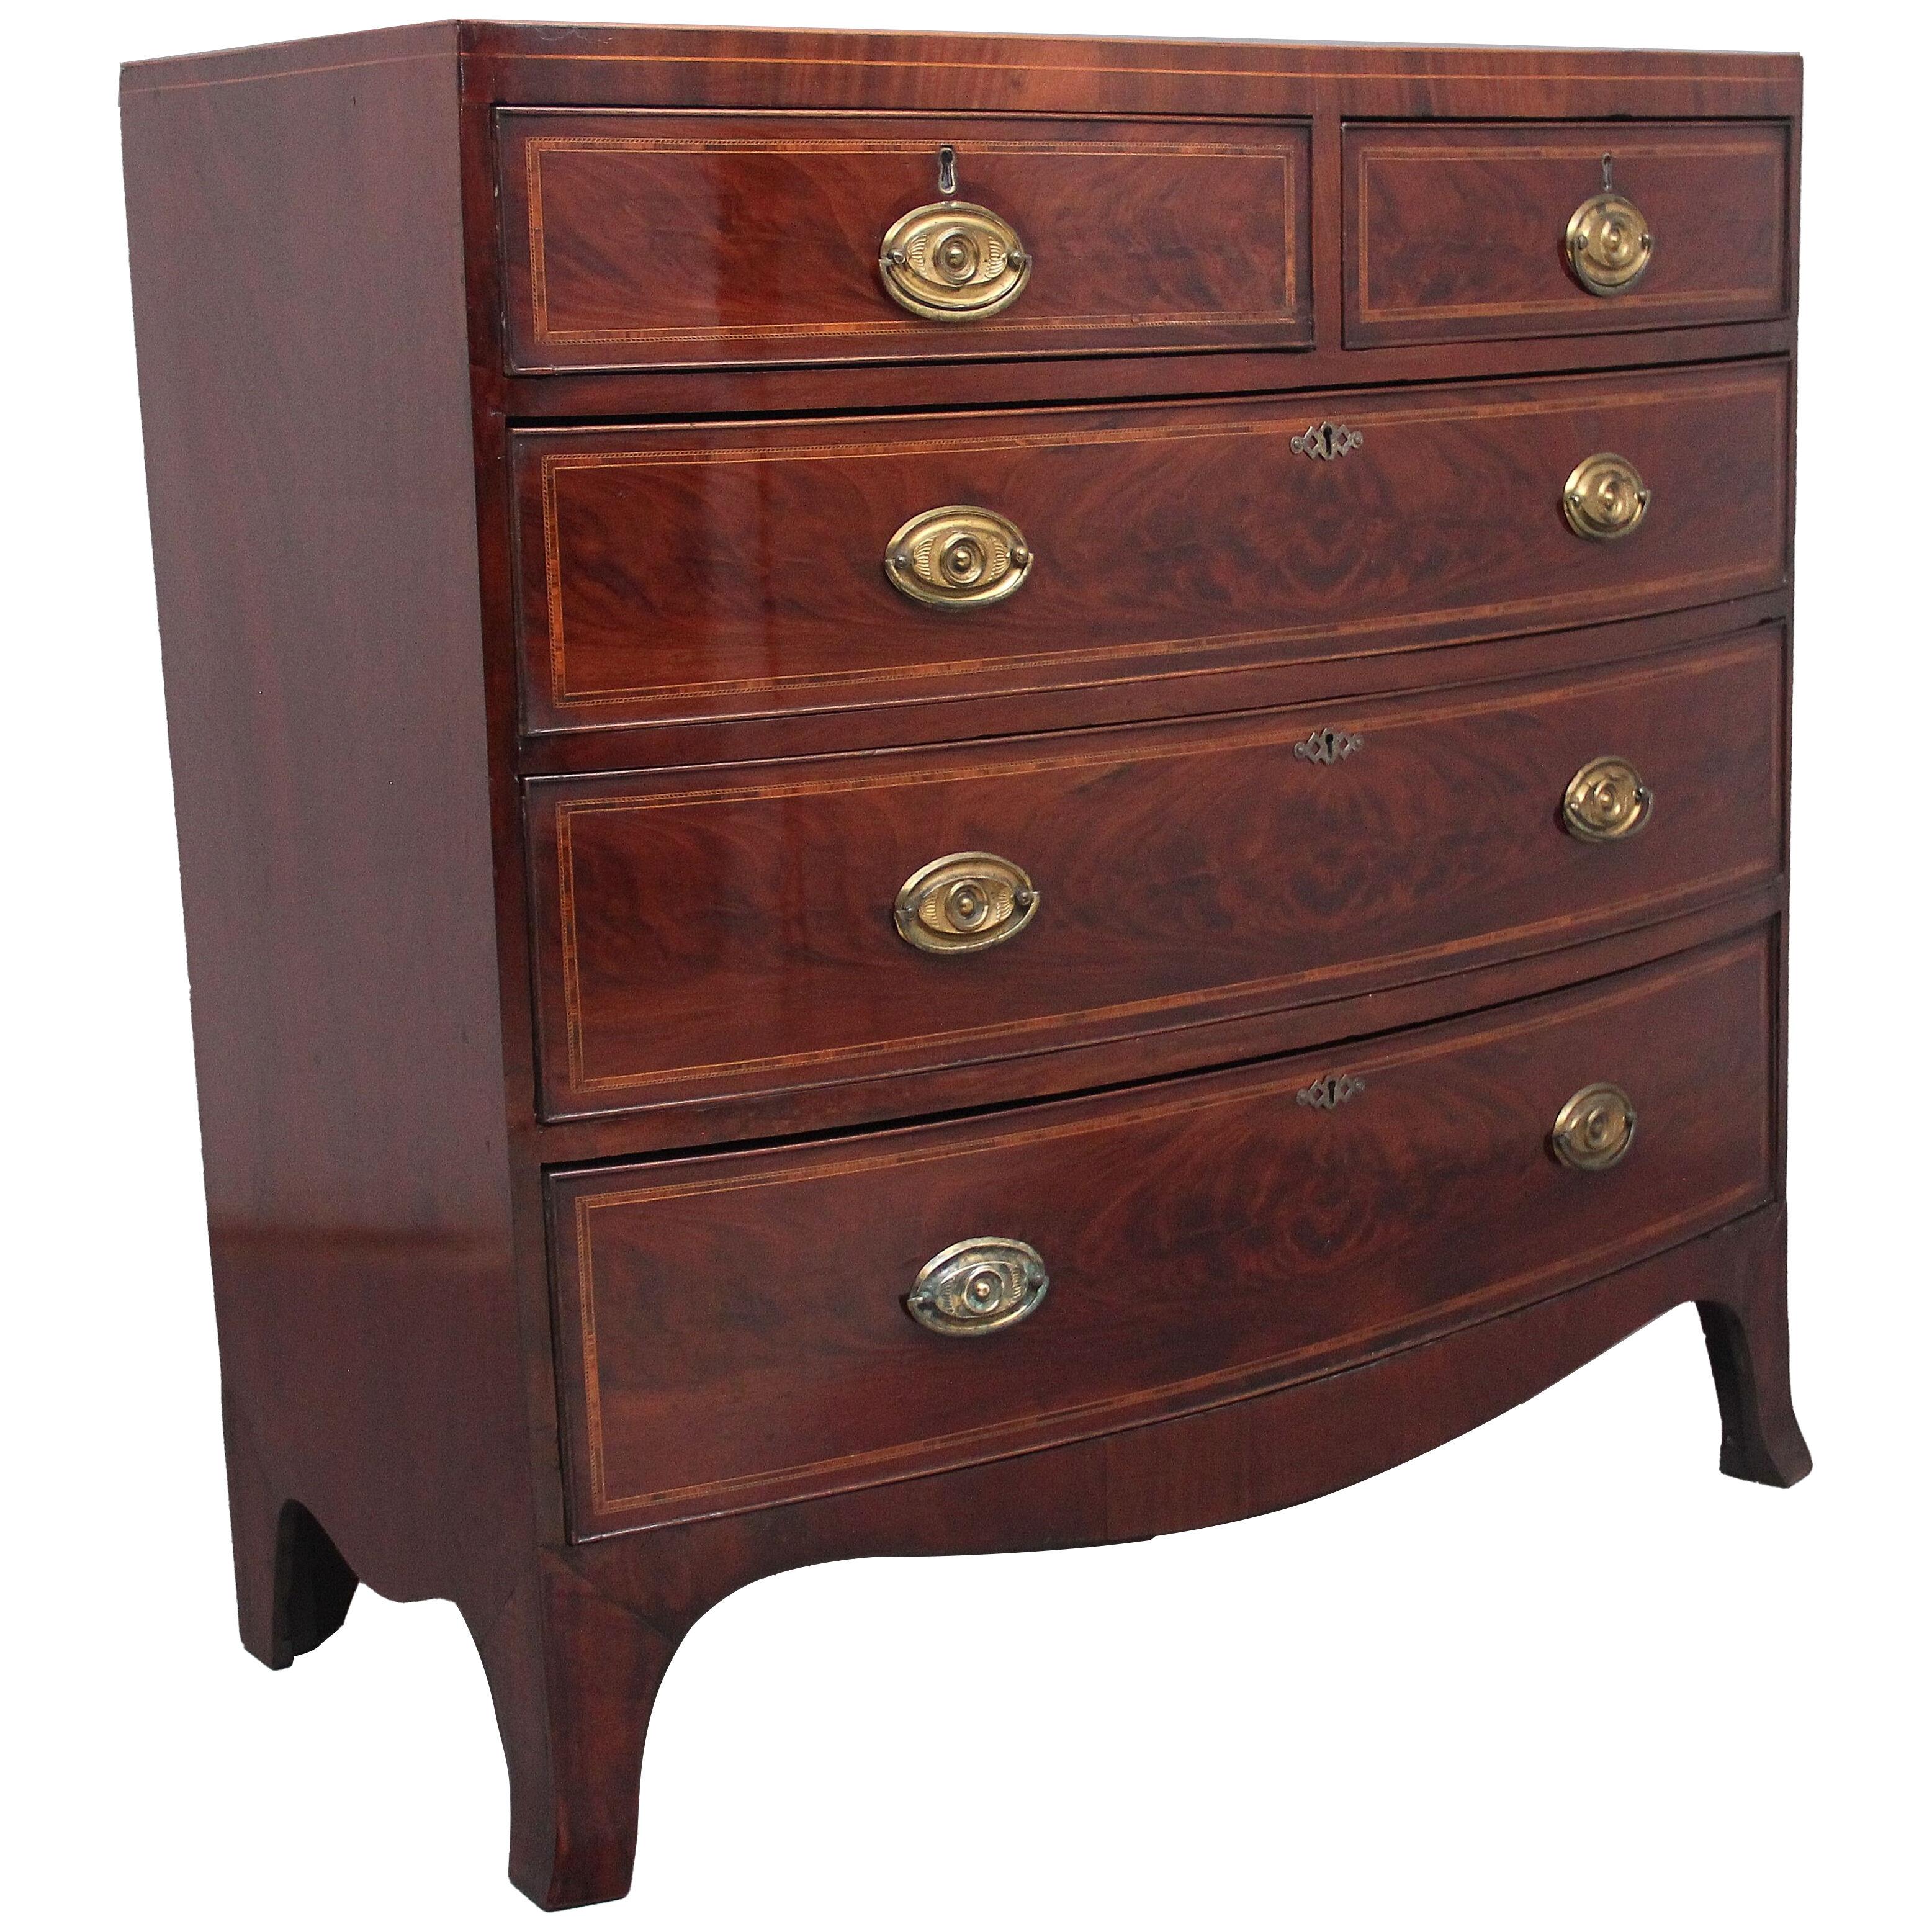 Early 19th Century mahogany inlaid chest of drawers